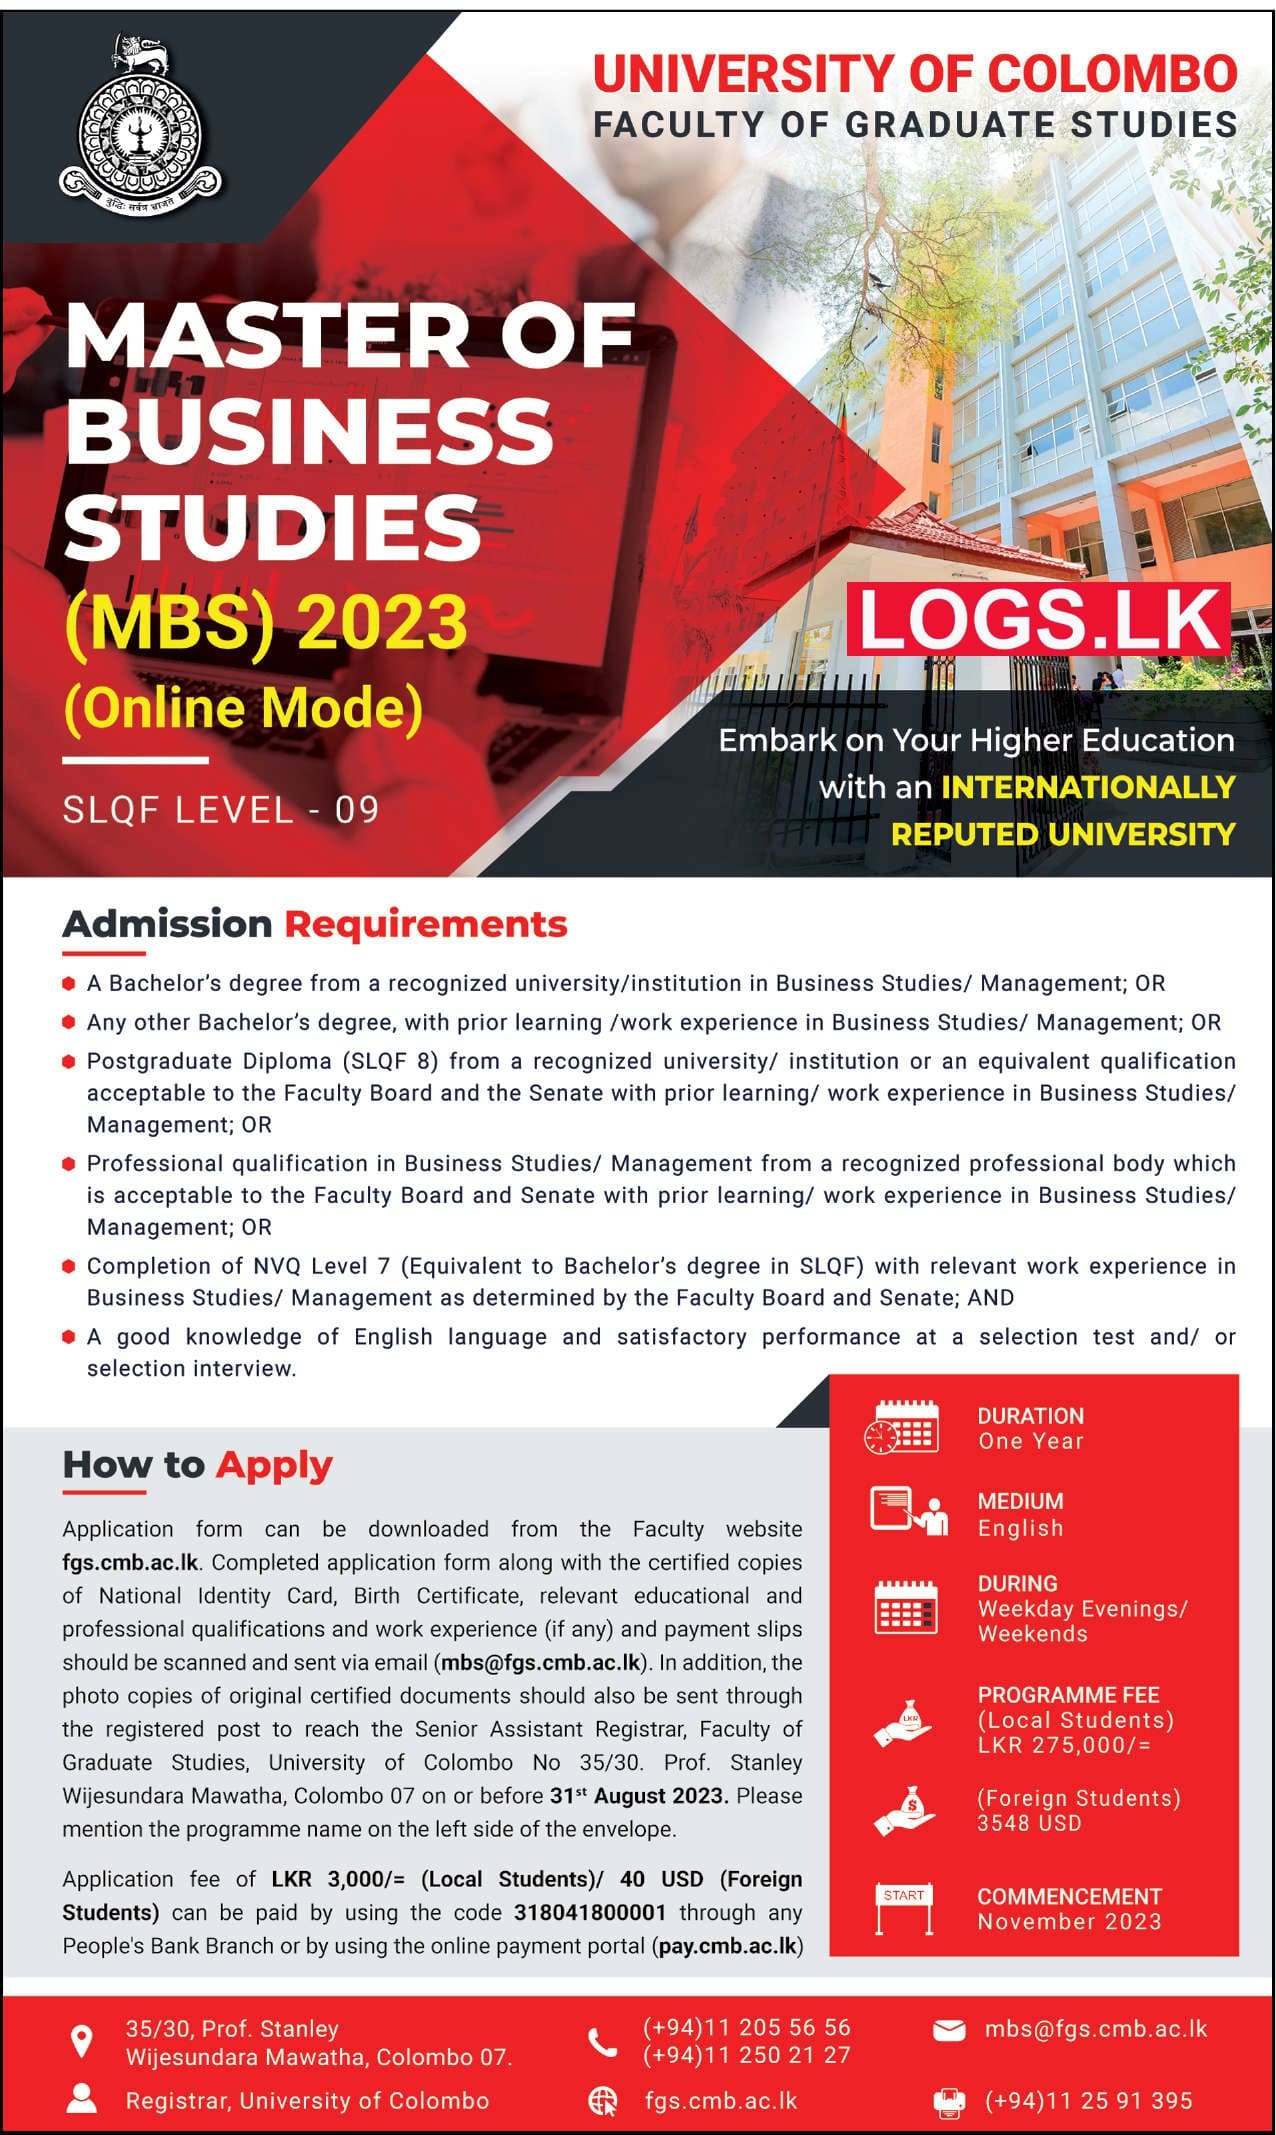 Master of Business Studies (MBS) 2023 - University Of Colombo Degree Application Form, Details Download